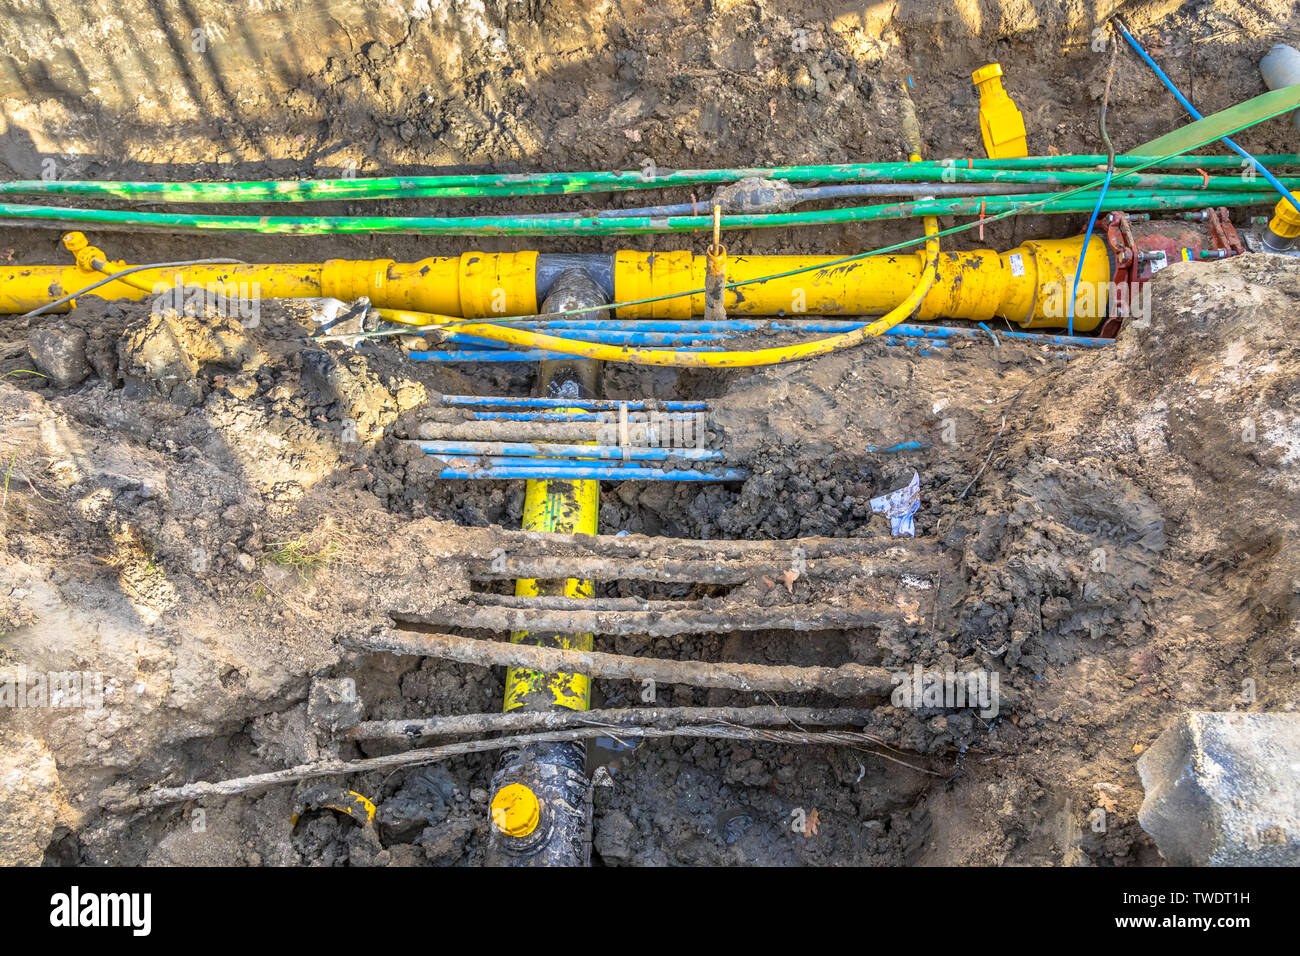 Neat orderly organised cables, pipes and sewage under pedestrian walkway during renovation of the infrastructure system. Netherlands Stock Photo